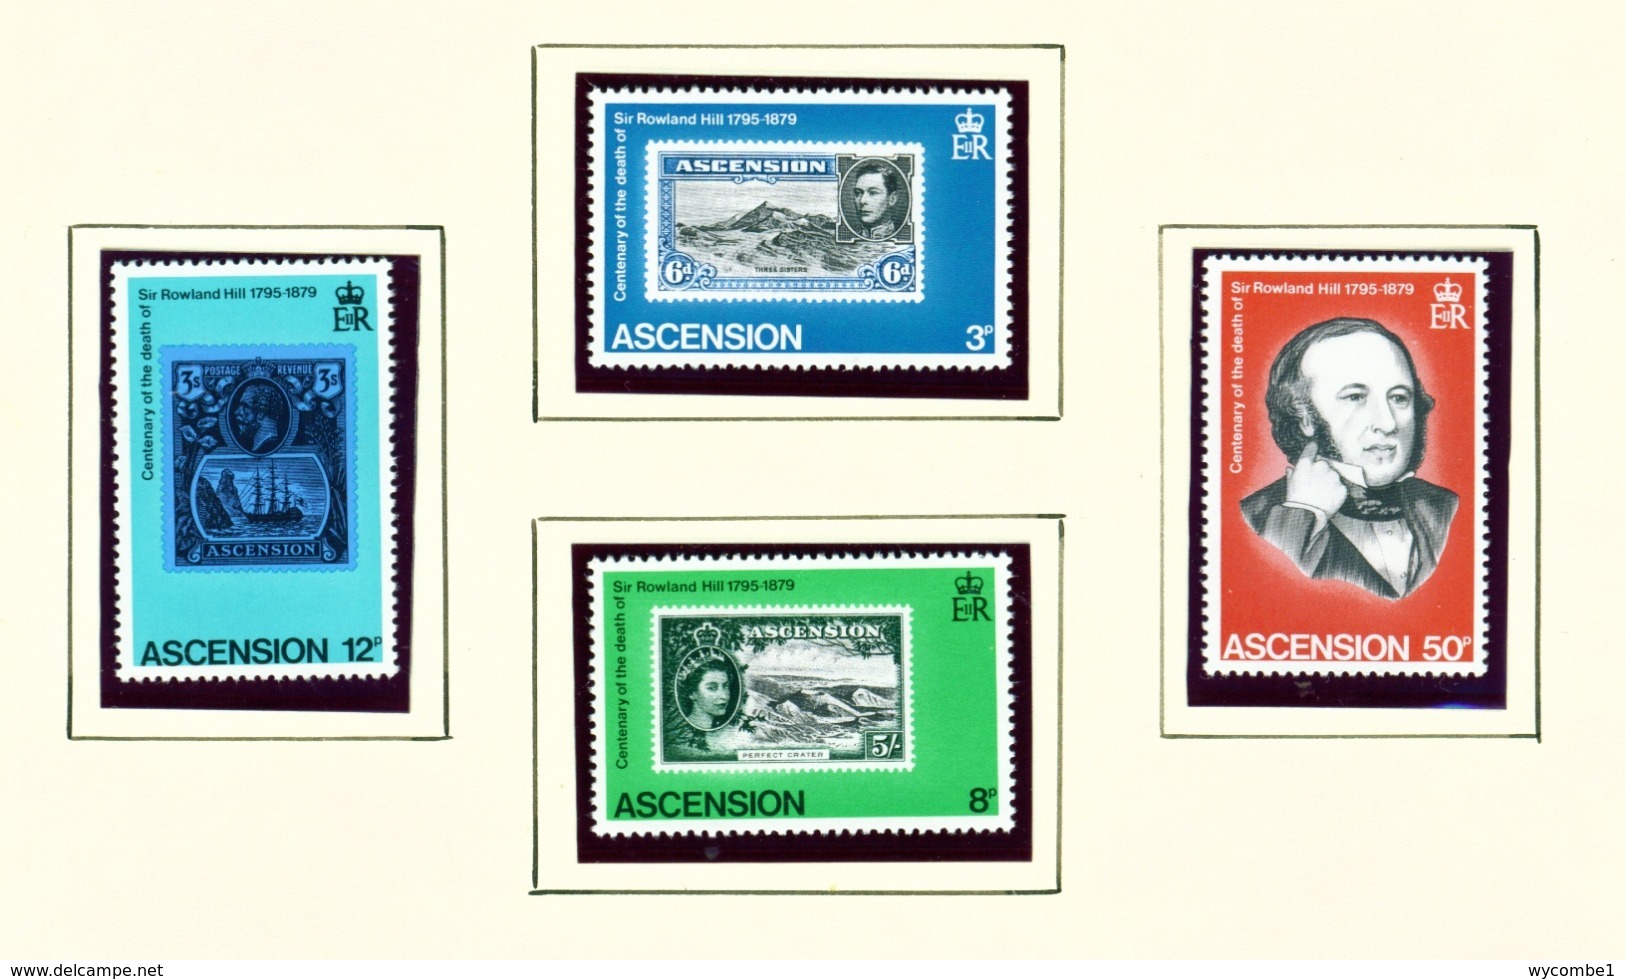 ASCENSION  -  1979 Rowland Hill Set Unmounted/Never Hinged Mint - Ascension